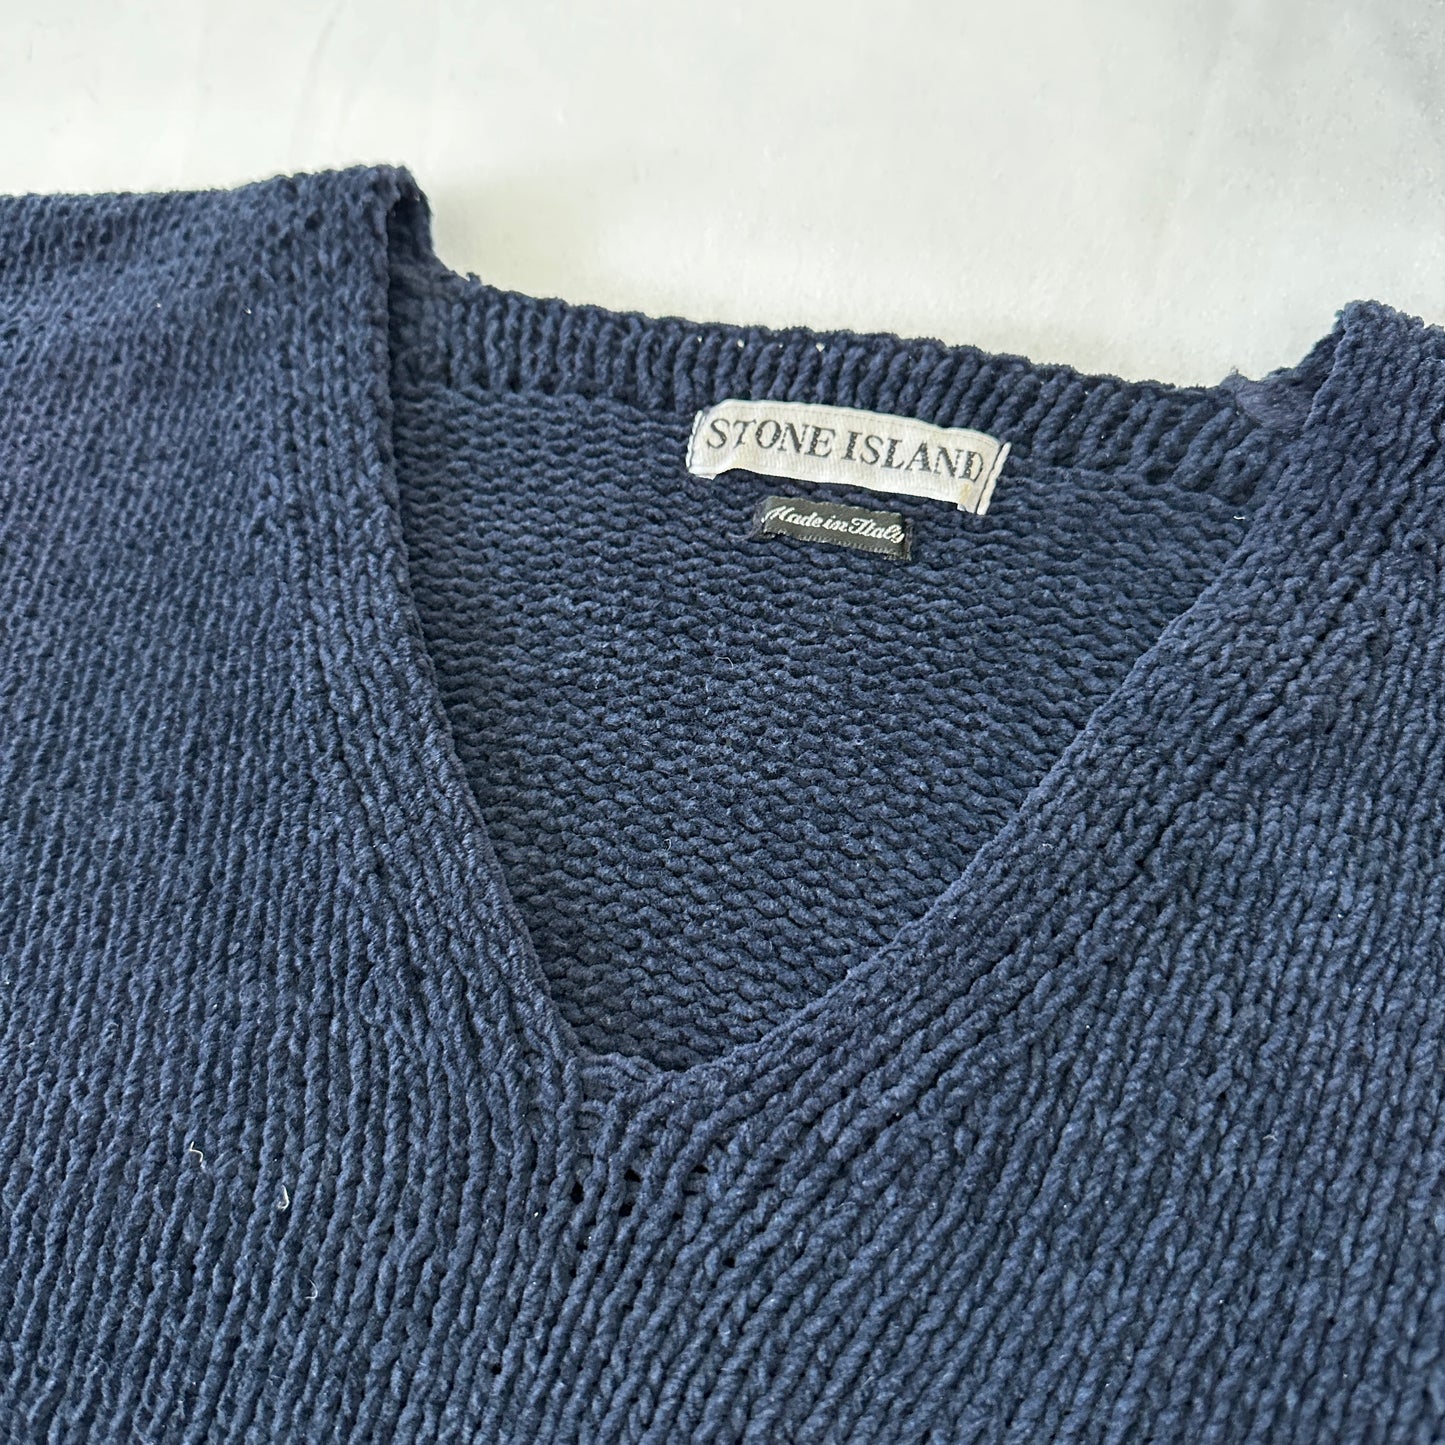 Stone Island 1997 Vintage Chenille V-Neck Cotton Knit Sweater - M - Made in Italy